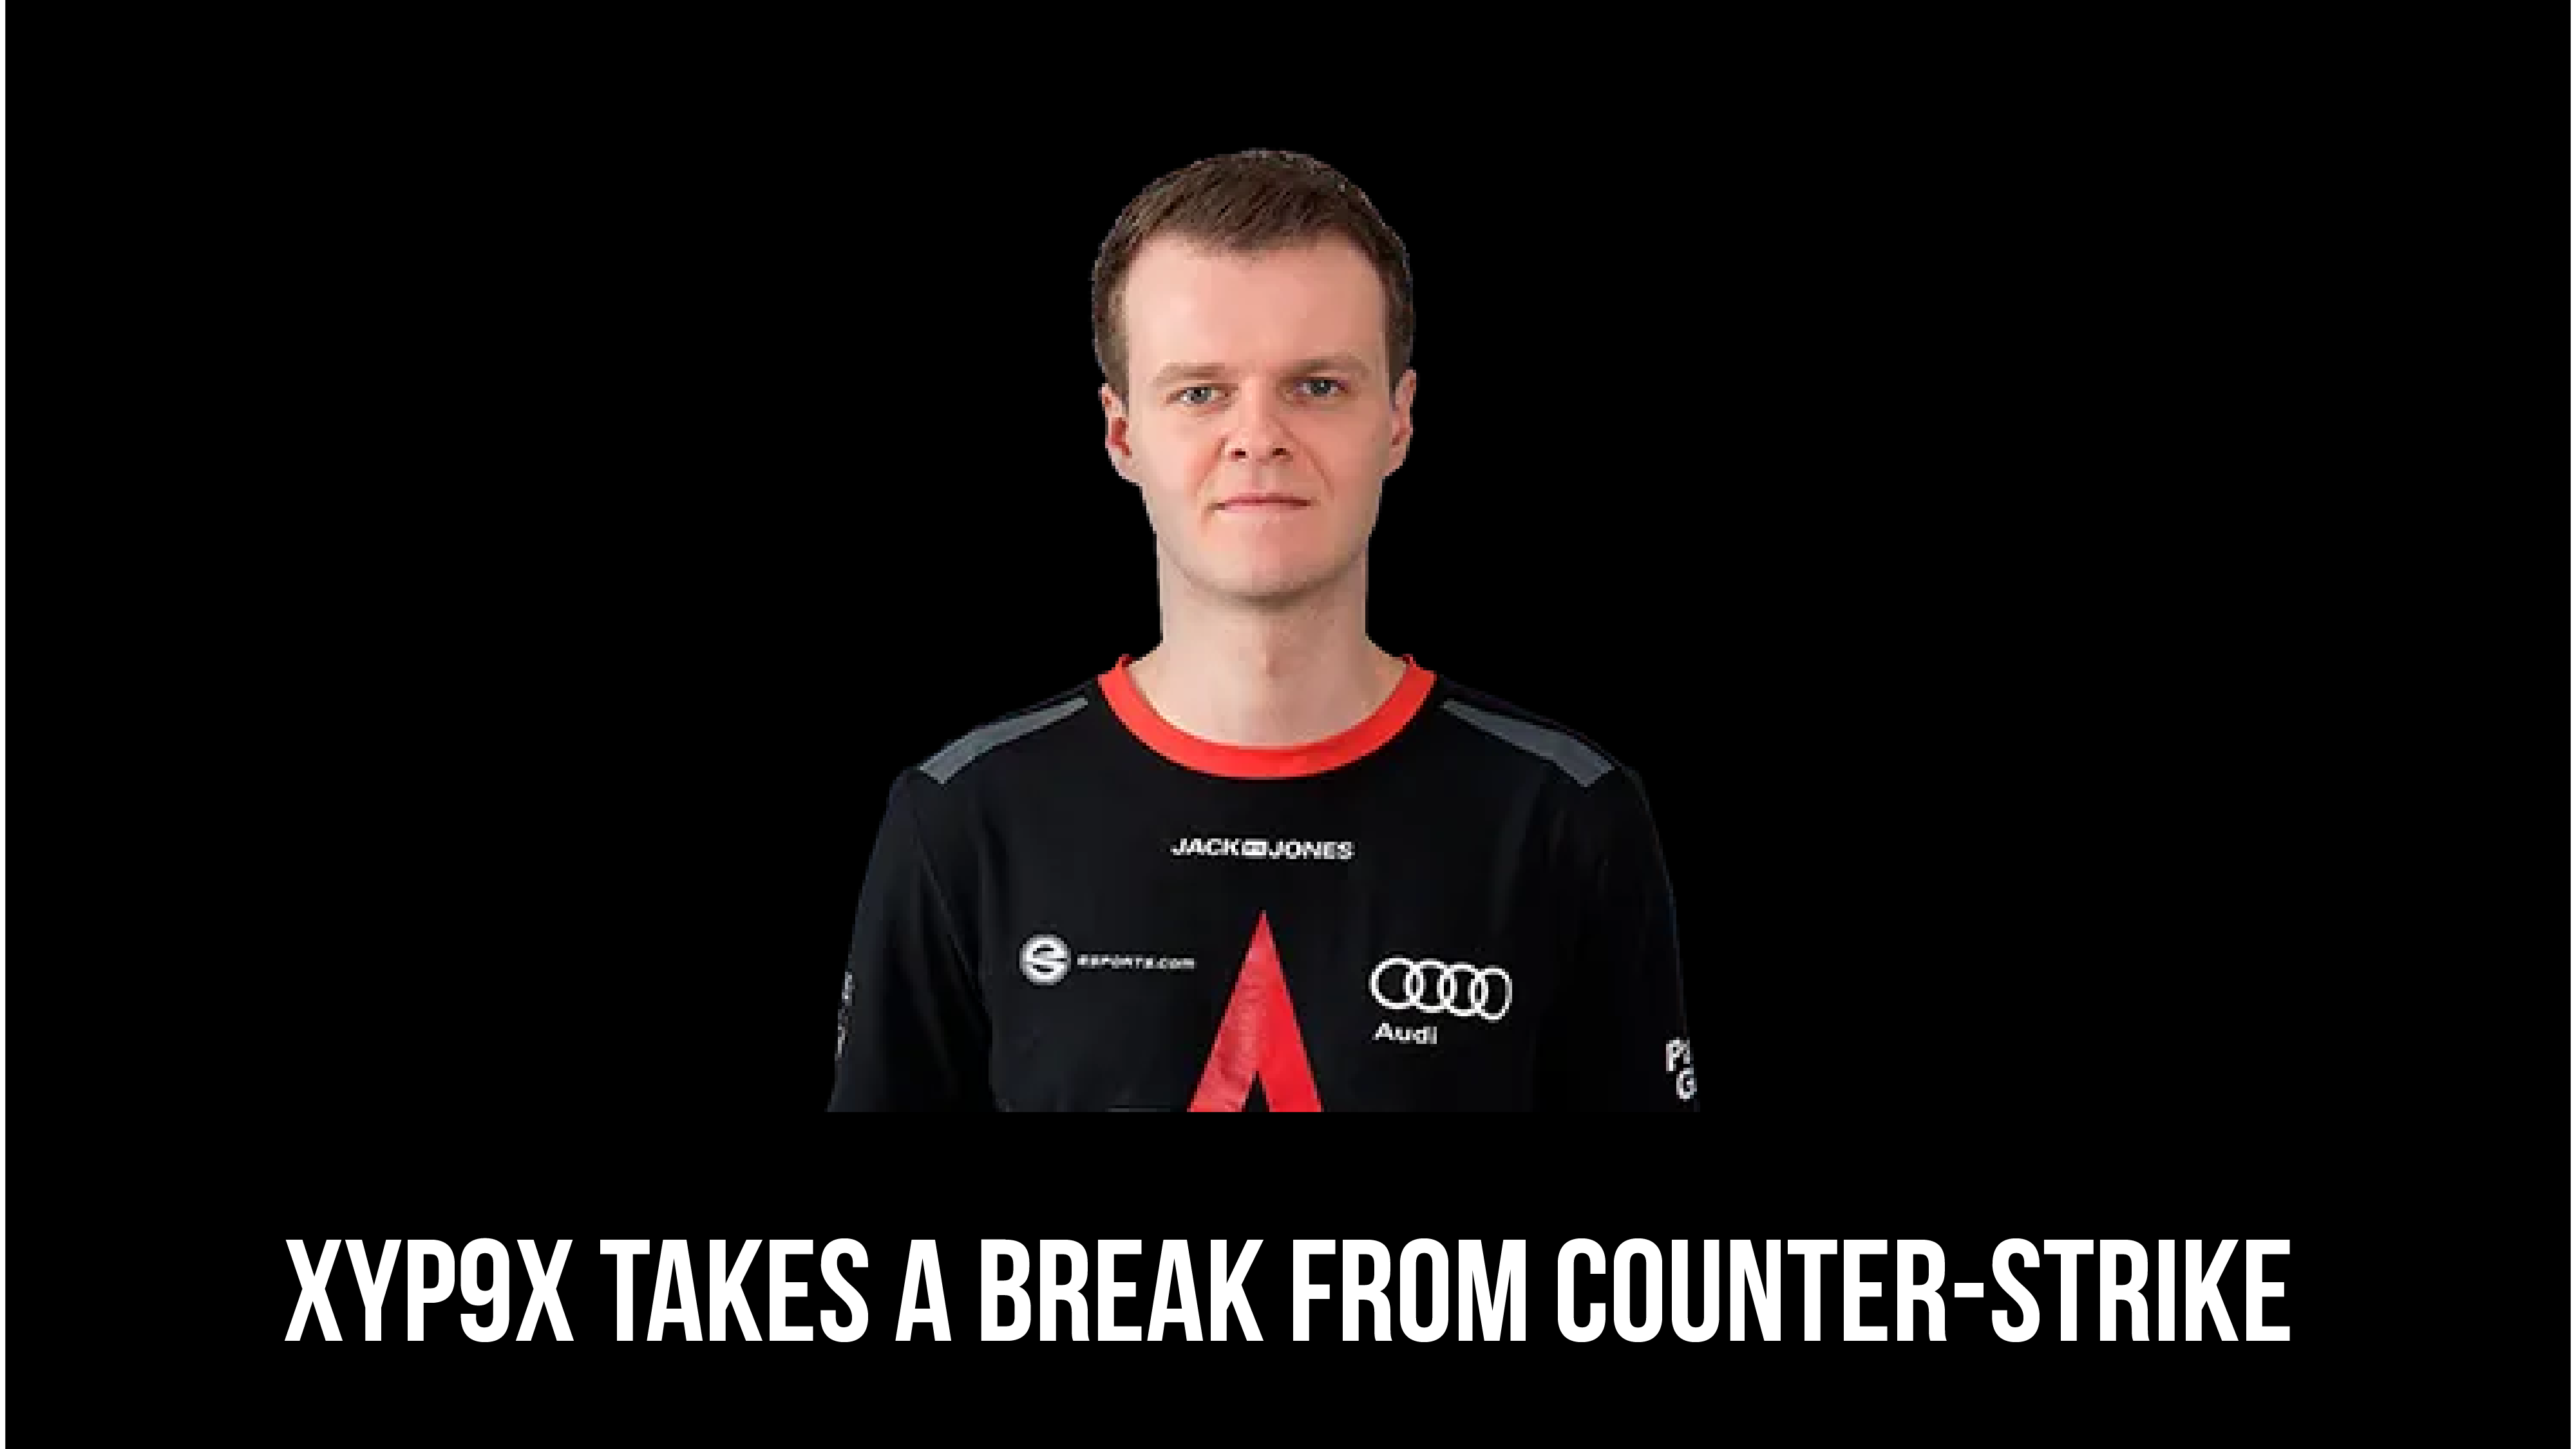 Xyp9x Takes Leave From Astralis - Hotspawn.com